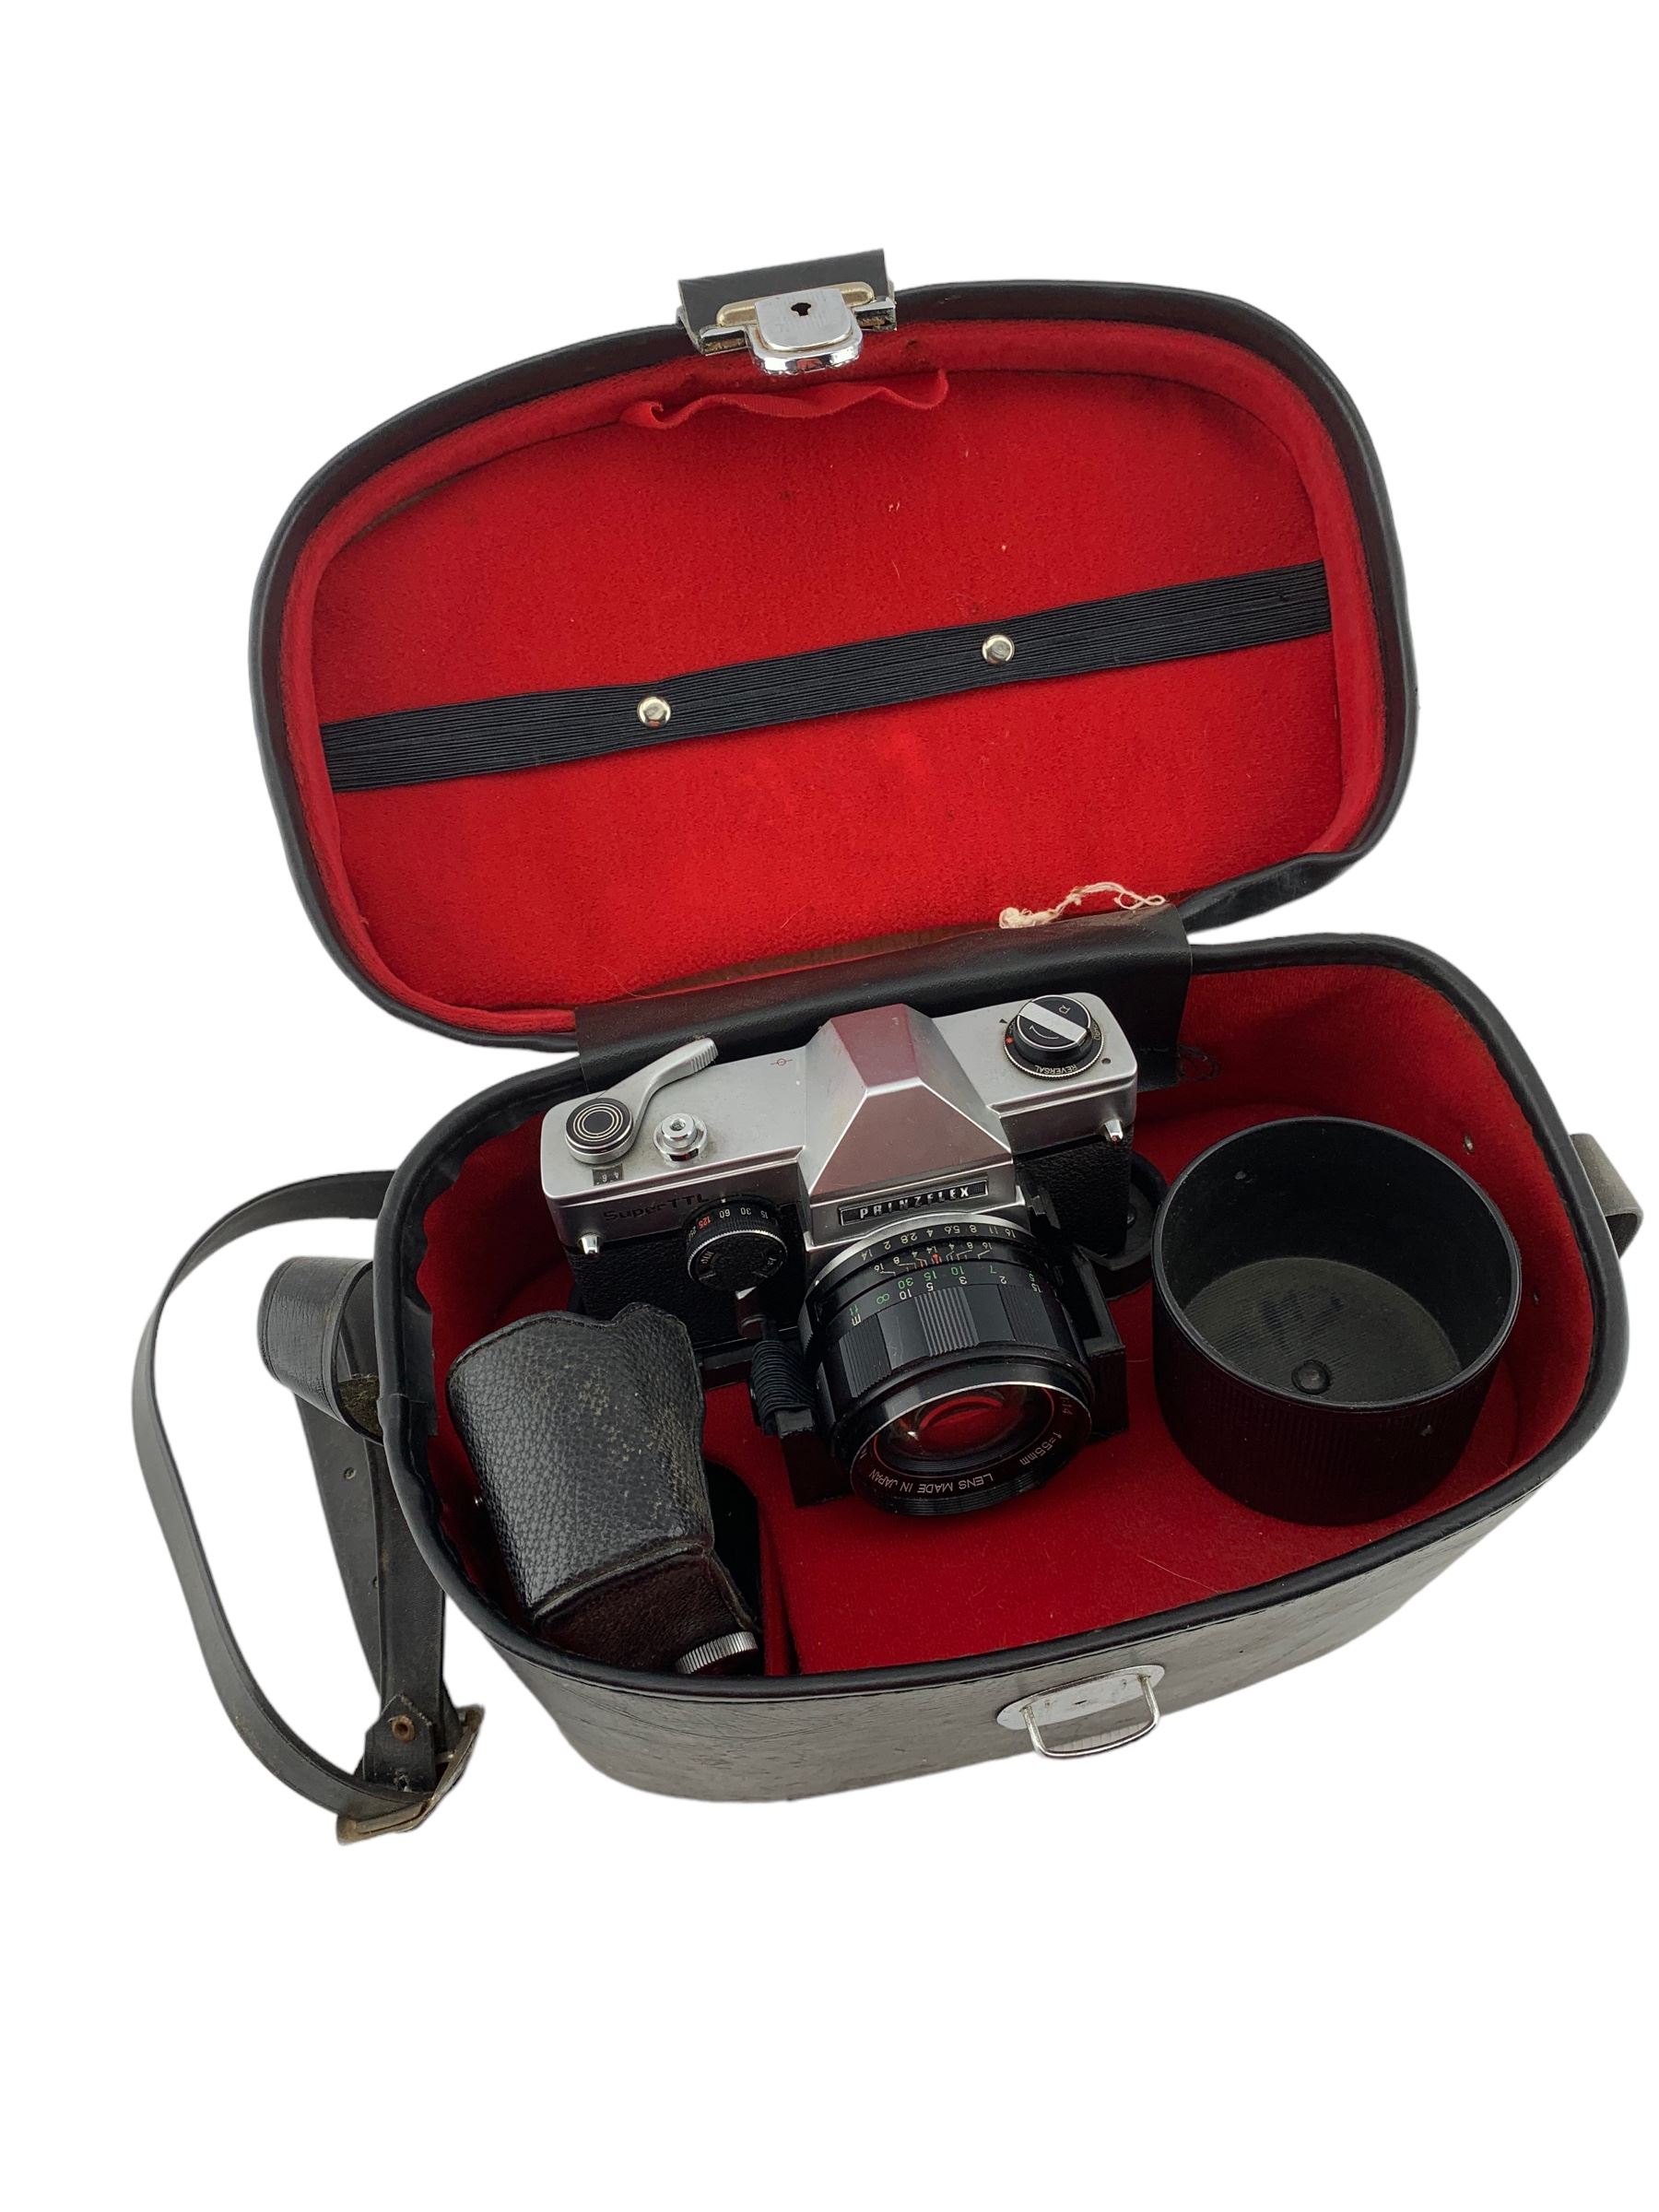 Prinzflex Super TTL camera with Super Reflecta lens in case and carrying bag